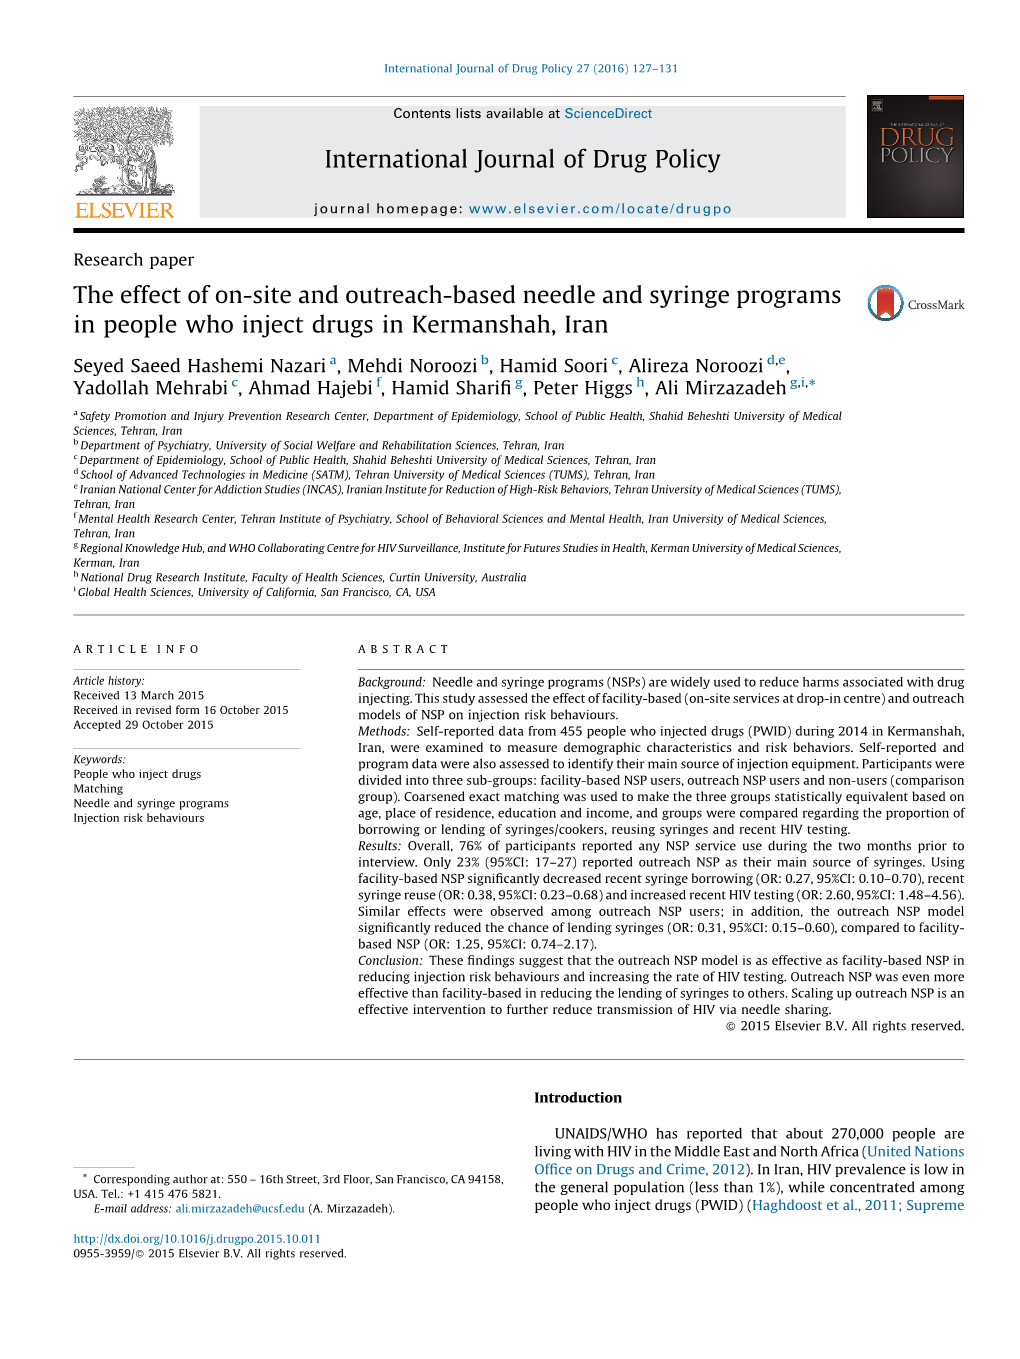 The Effect of On-Site and Outreach-Based Needle and Syringe Programs